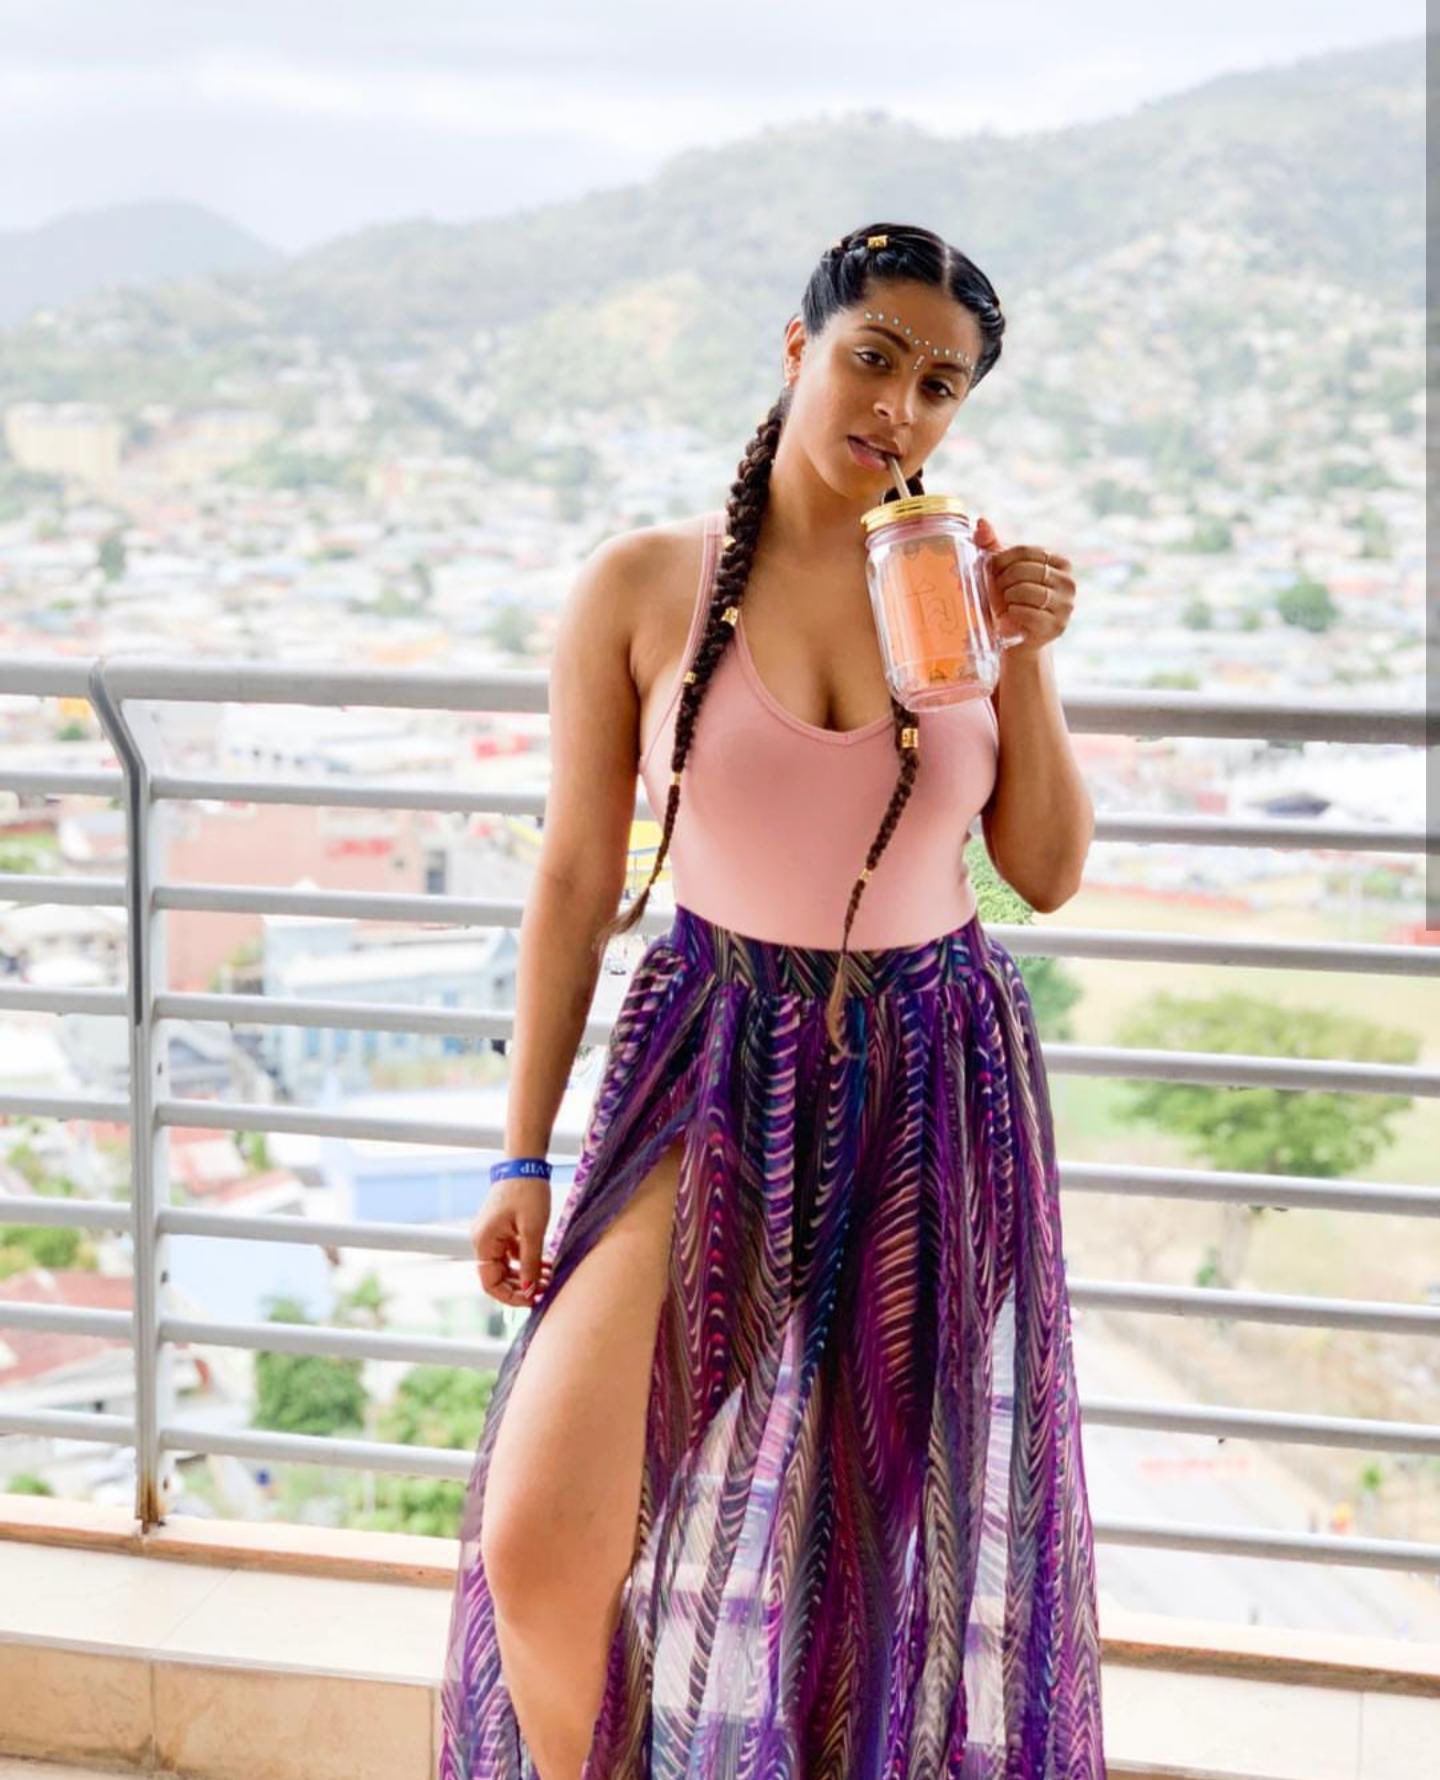 Happy Birthday shout out to a YouTube Star the hot and sexy Lilly Singh           